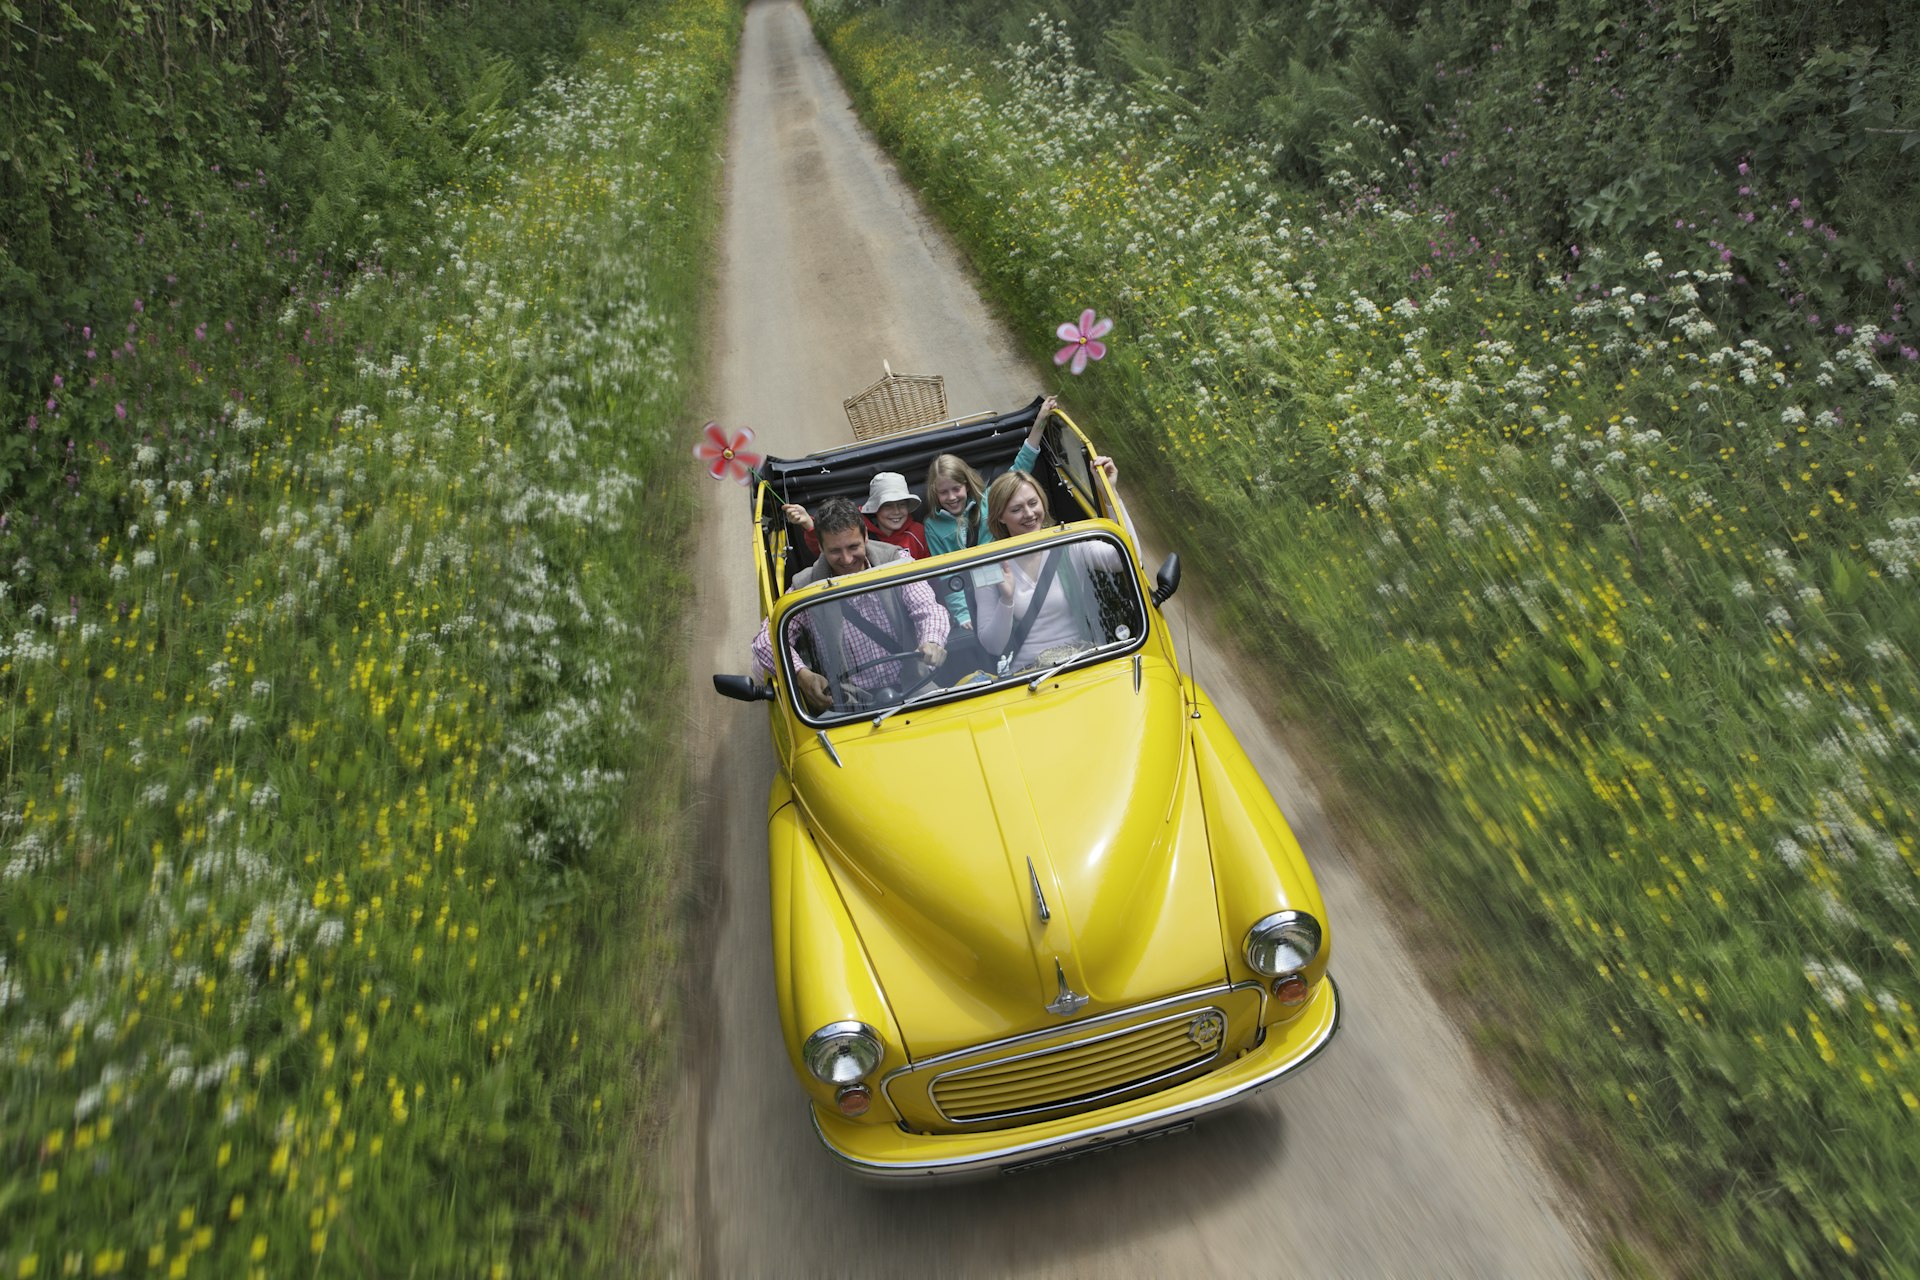 A family driving in open top car down country lane in England